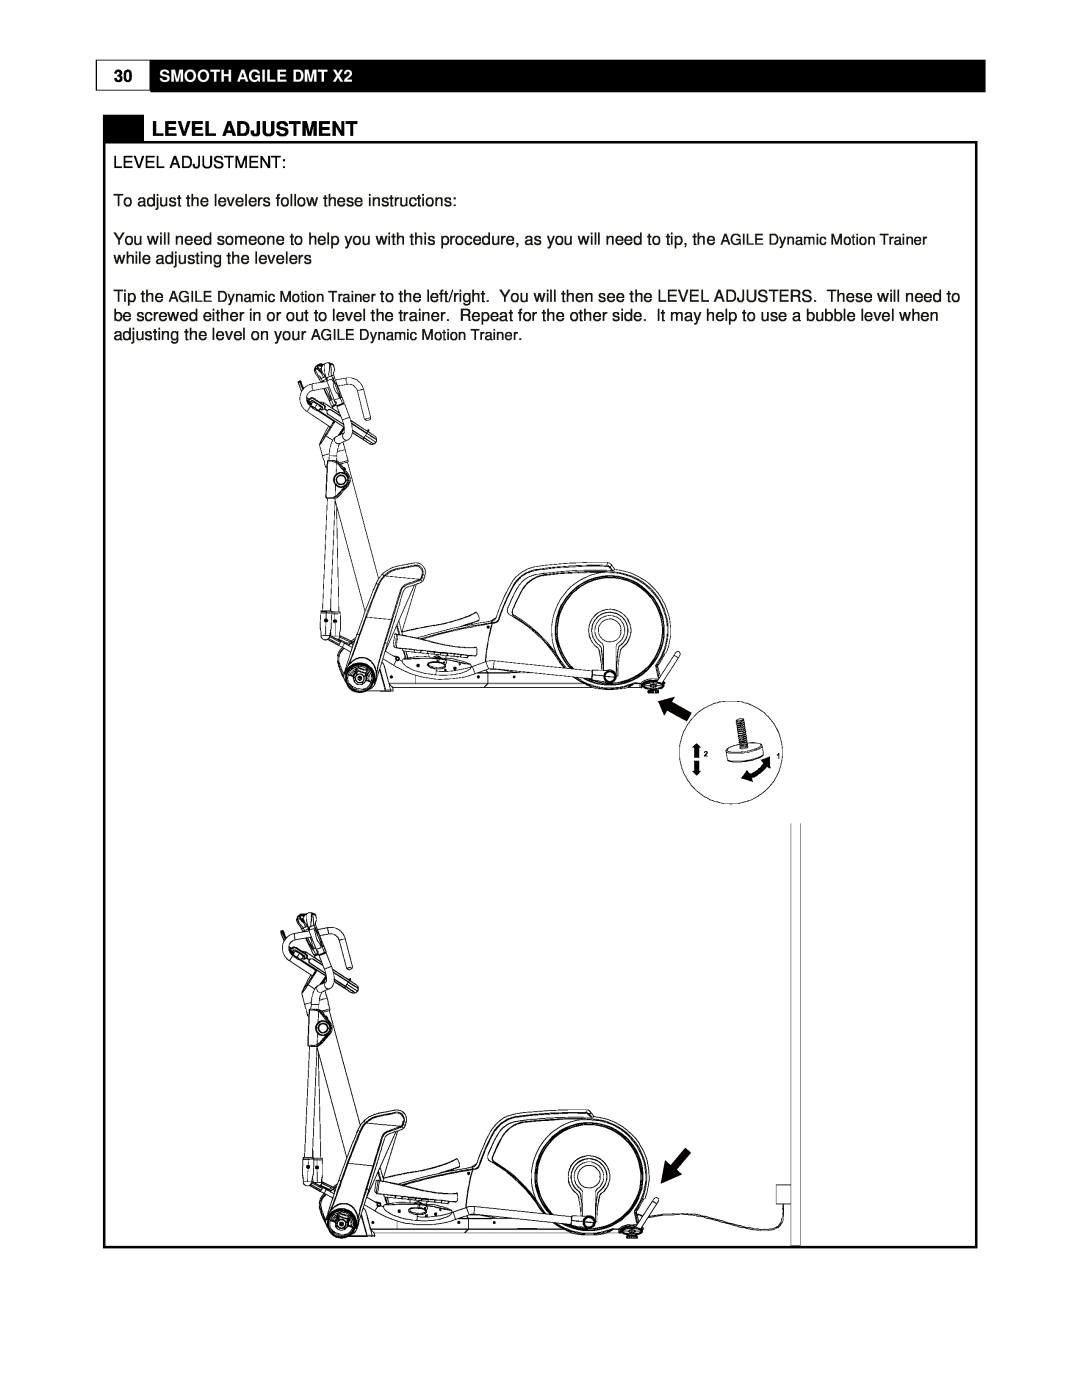 Smooth Fitness DMT X2 user manual Level Adjustment, Smooth Agile Dmt 